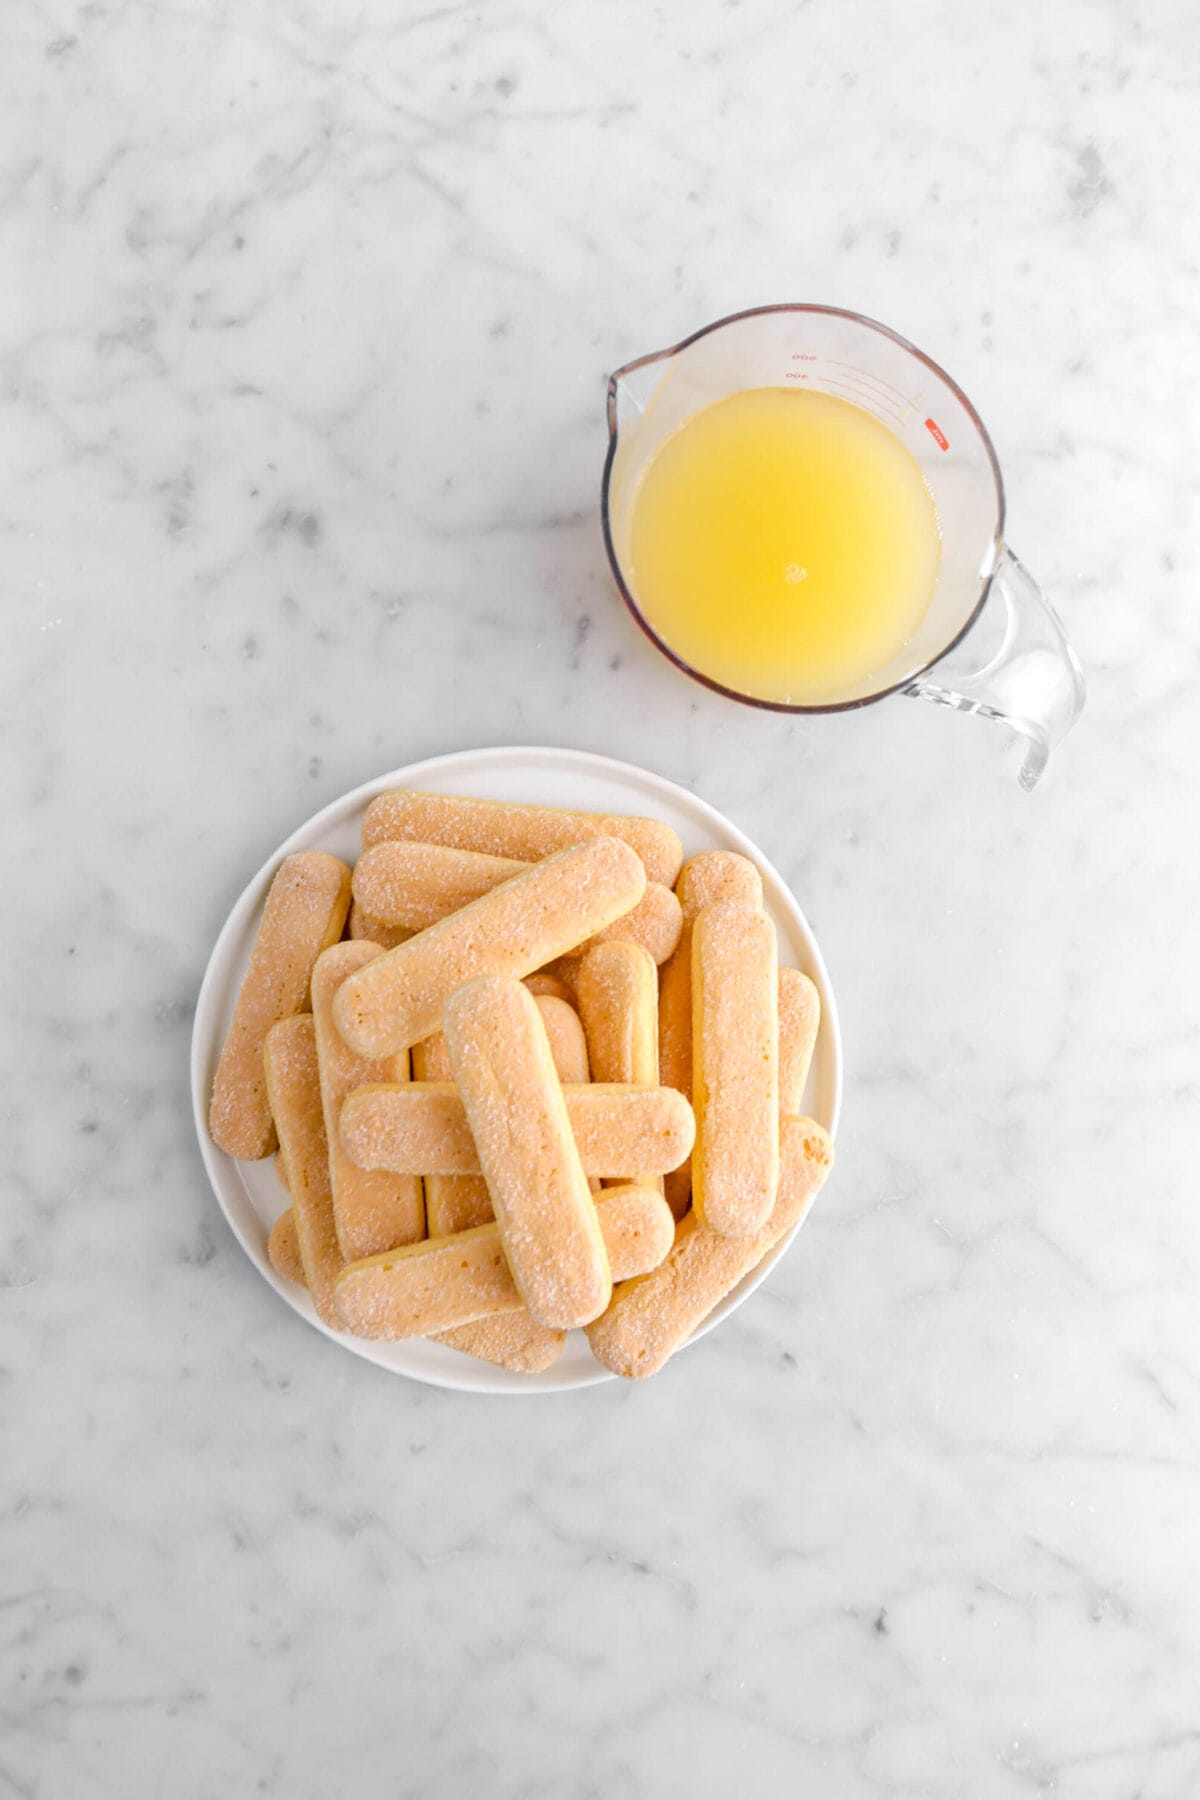 ladyfinger cookies and limoncello on marble surface.